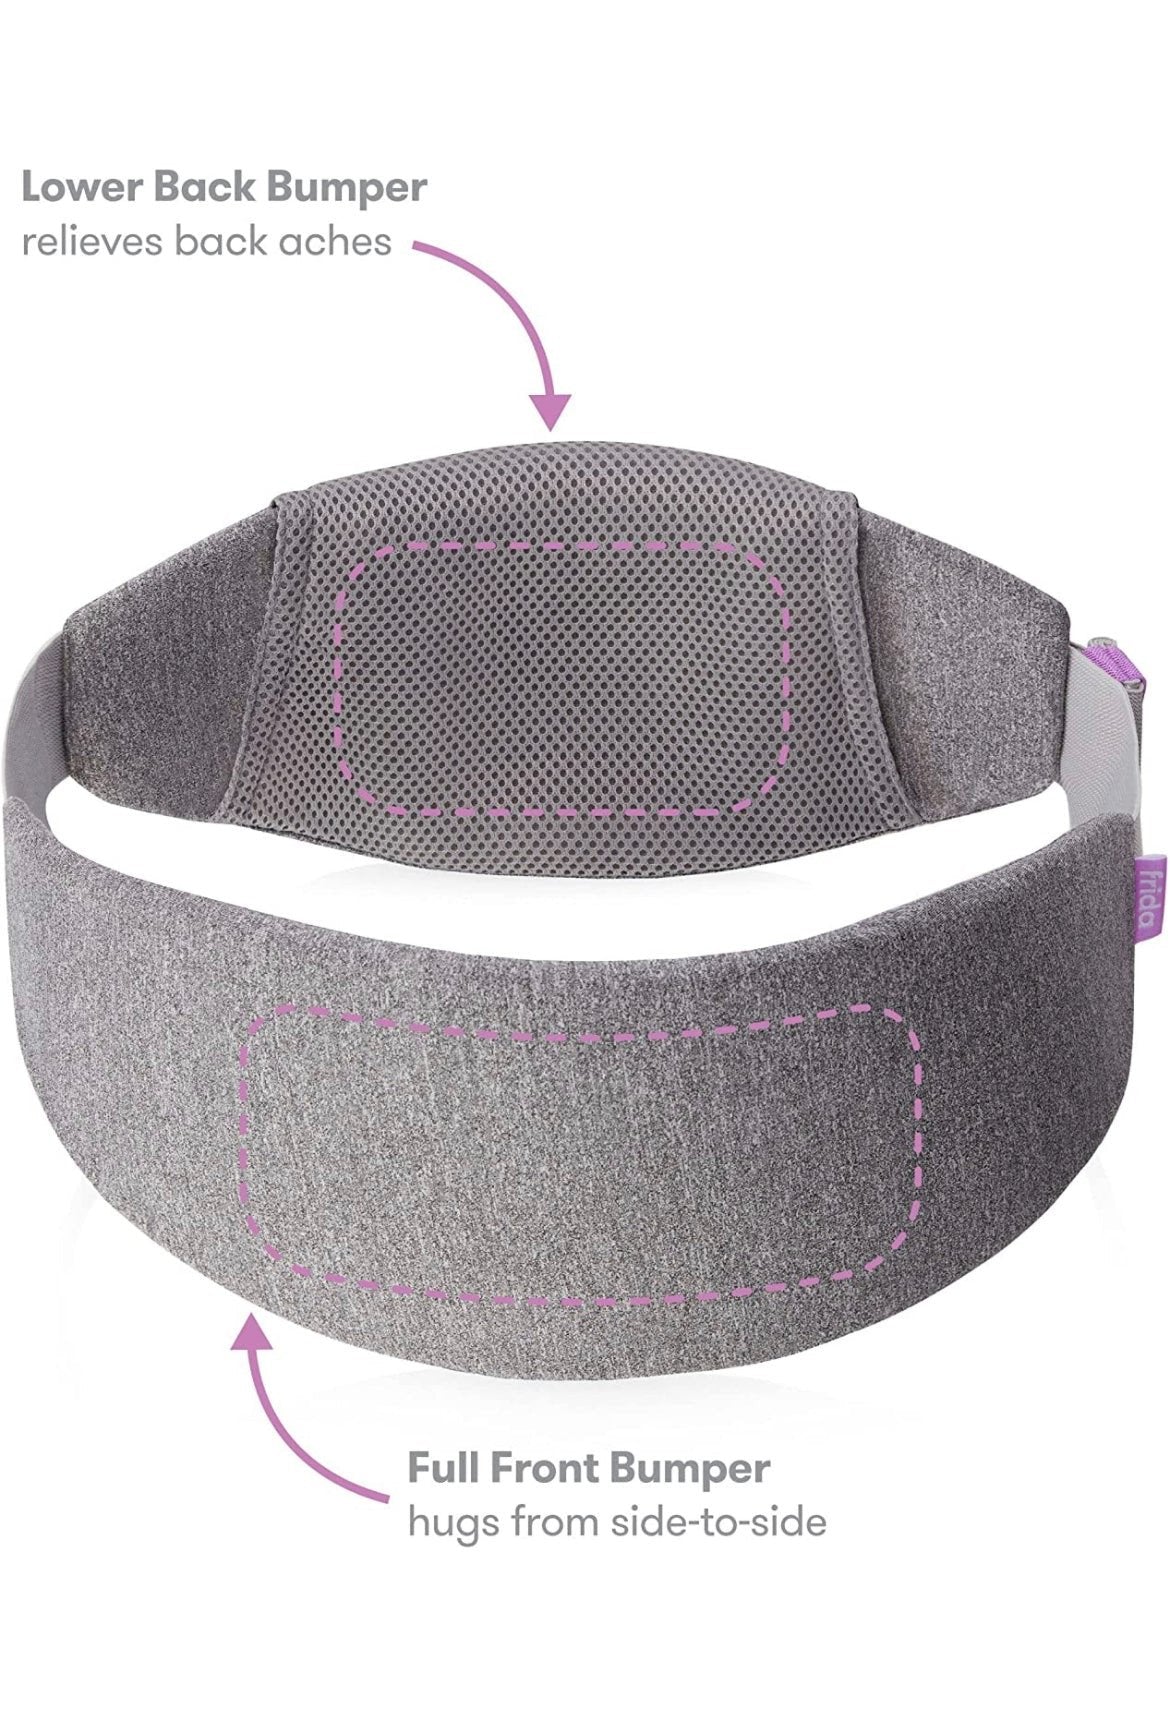 C-Section Recovery Band, Hot + Cold Therapy by Frida Mom.